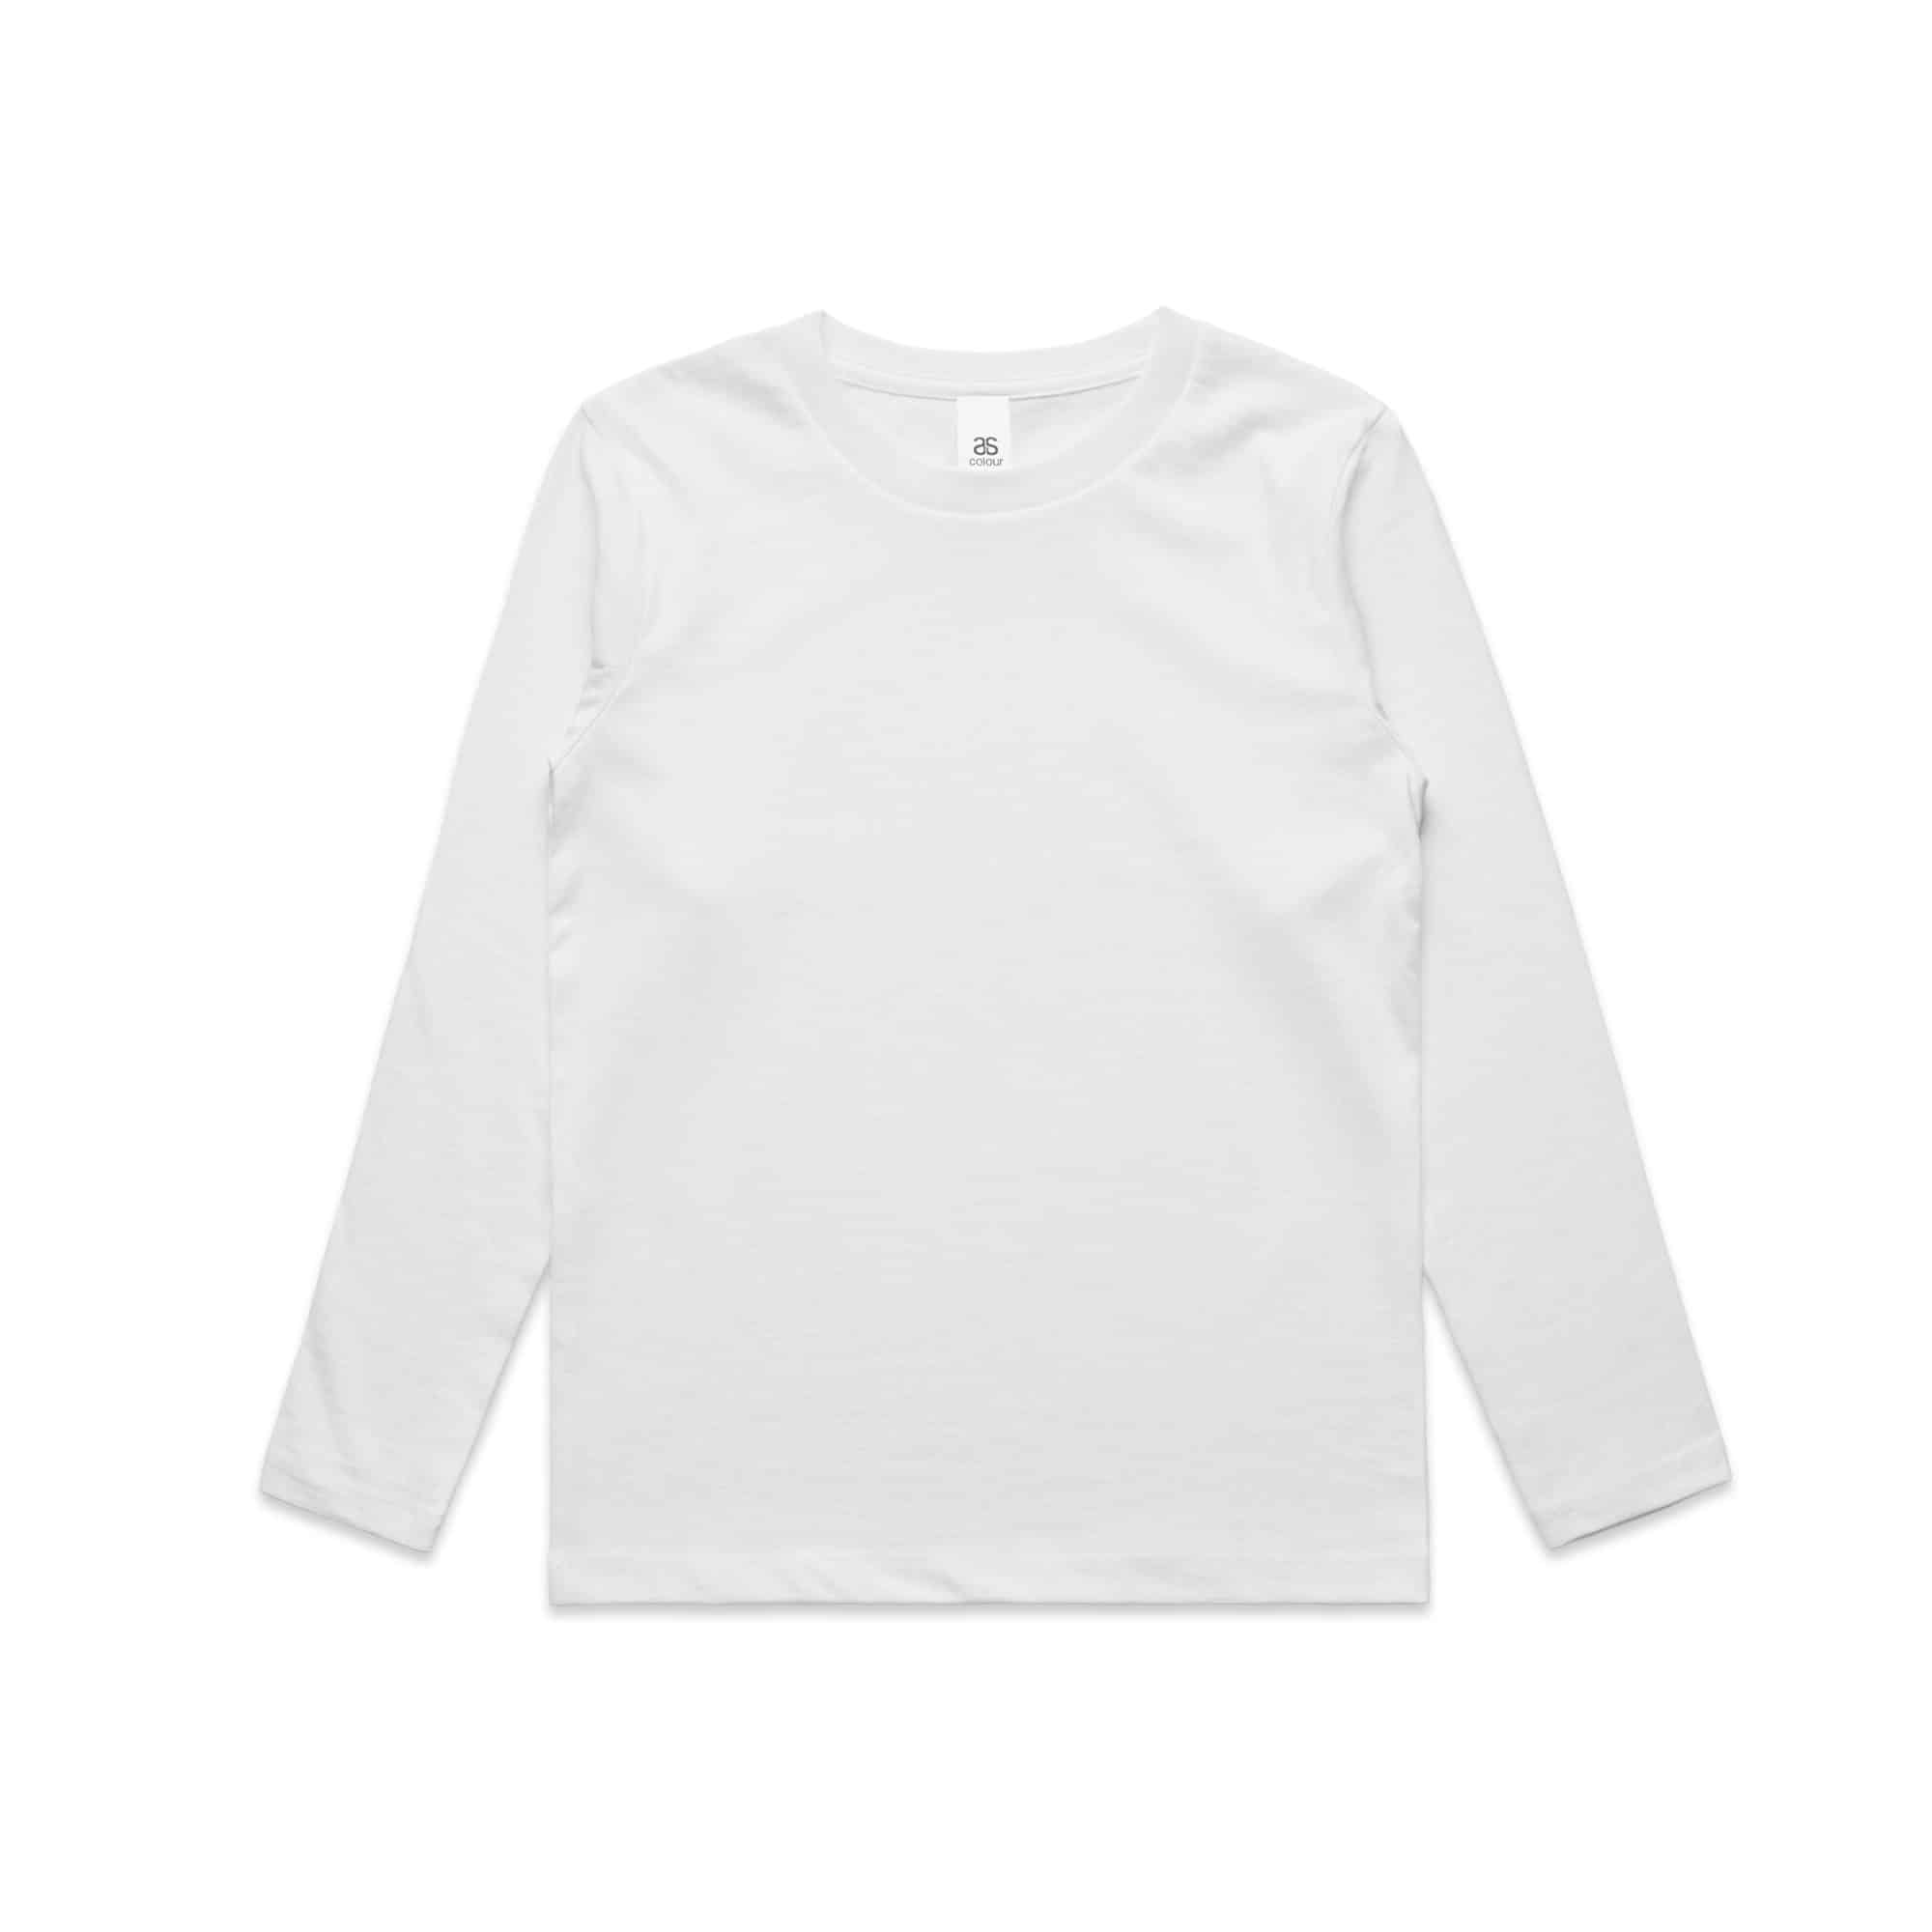 3008_AS_Youth-LS-Tee_White